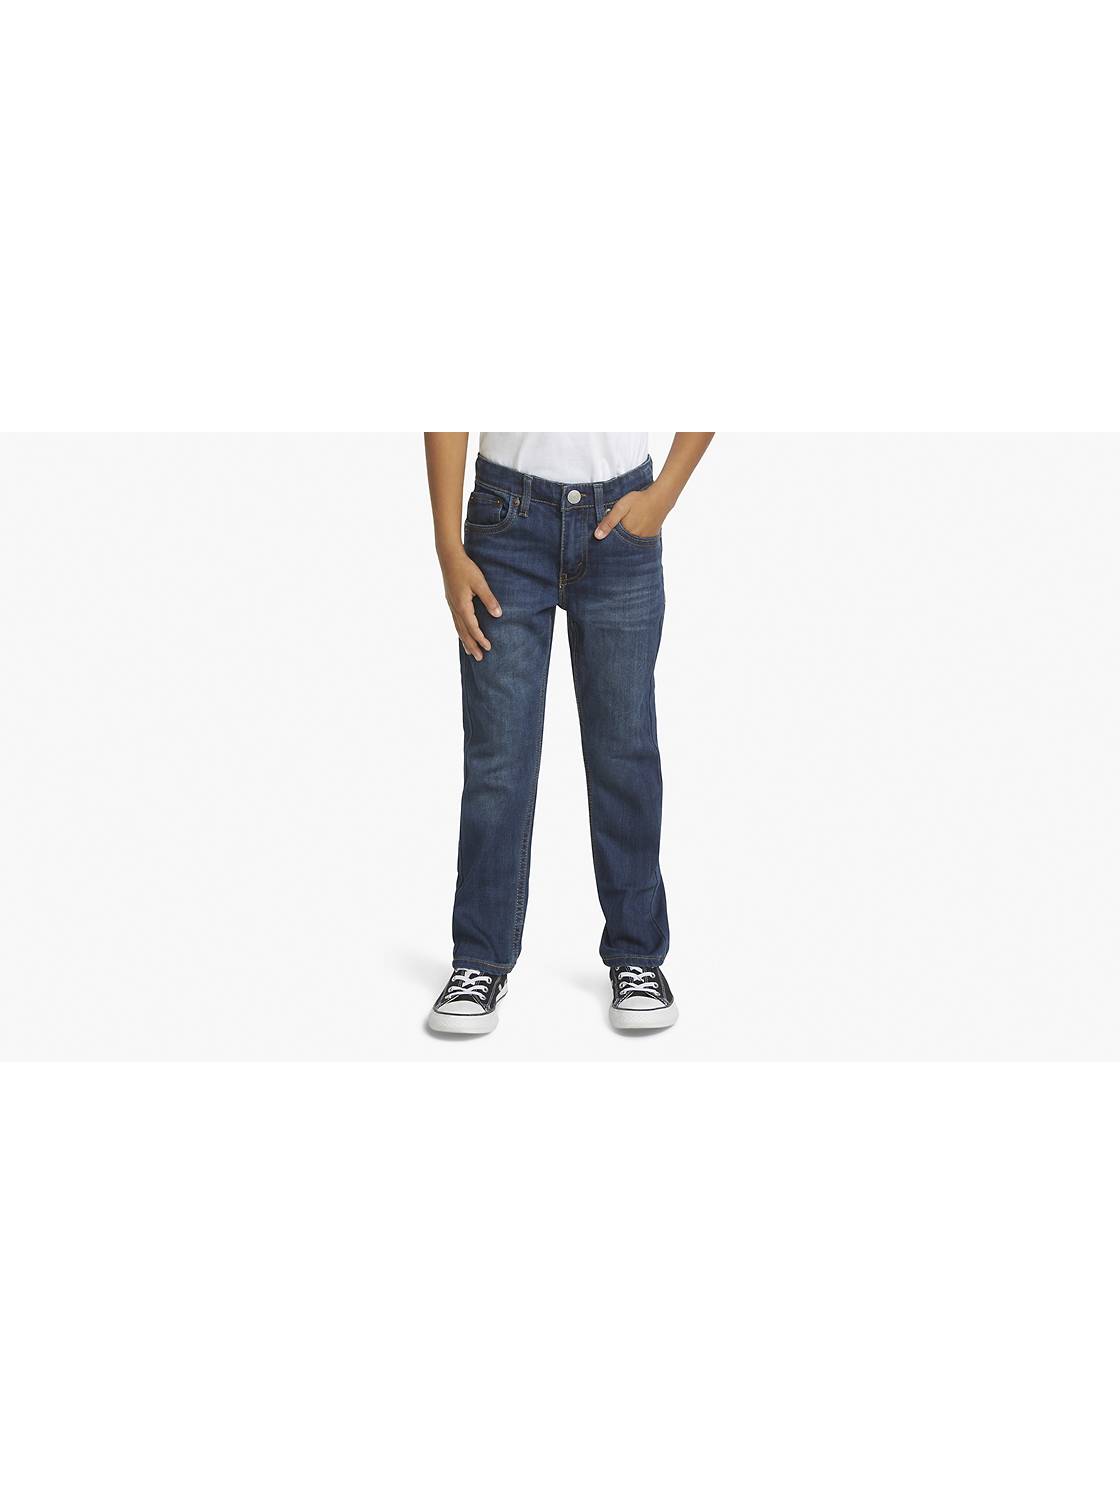 Boy's Jeans & Pants - Shop All Boys Skinny, Joggers & More